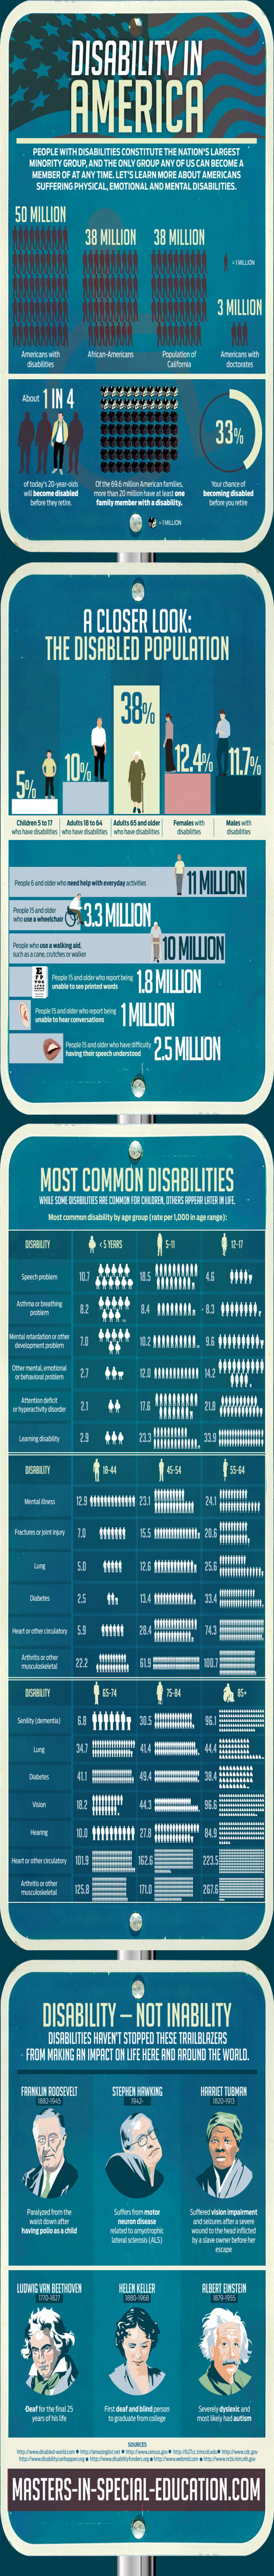 Disability in America: The Nation's Largest Minority Group